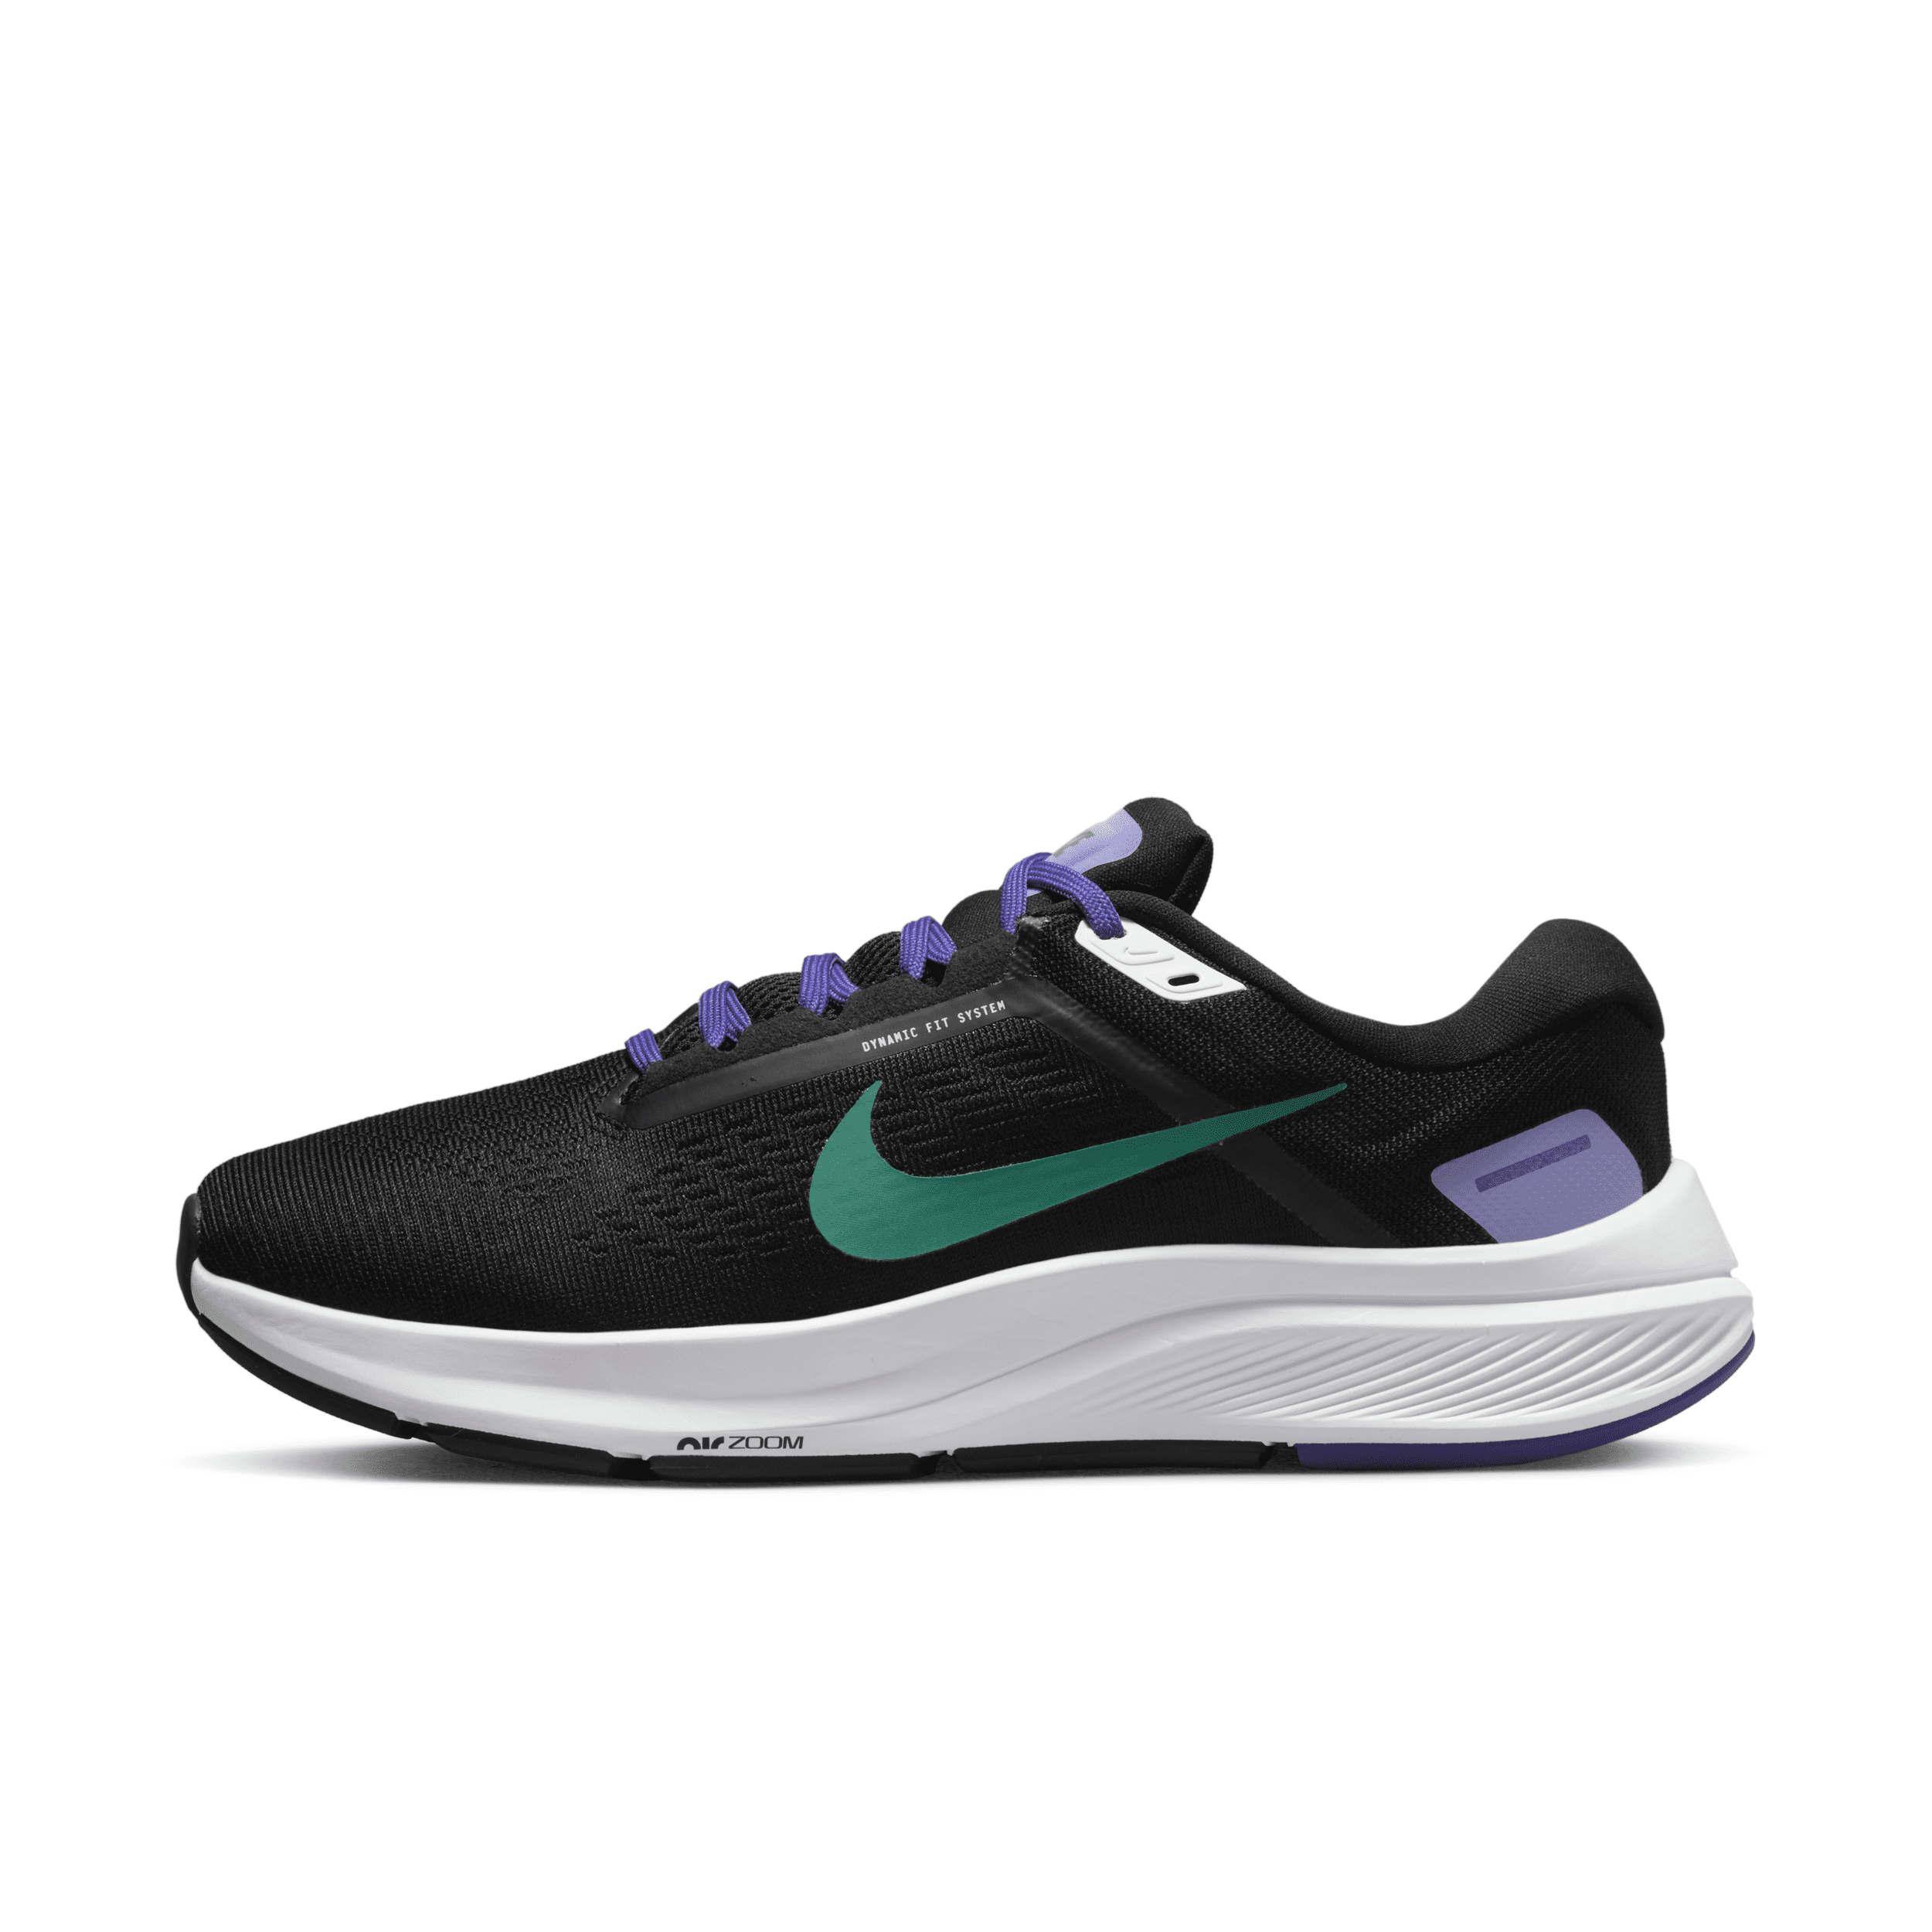 NIKE WOMEN'S STRUCTURE 24 ROAD RUNNING SHOES,14080059